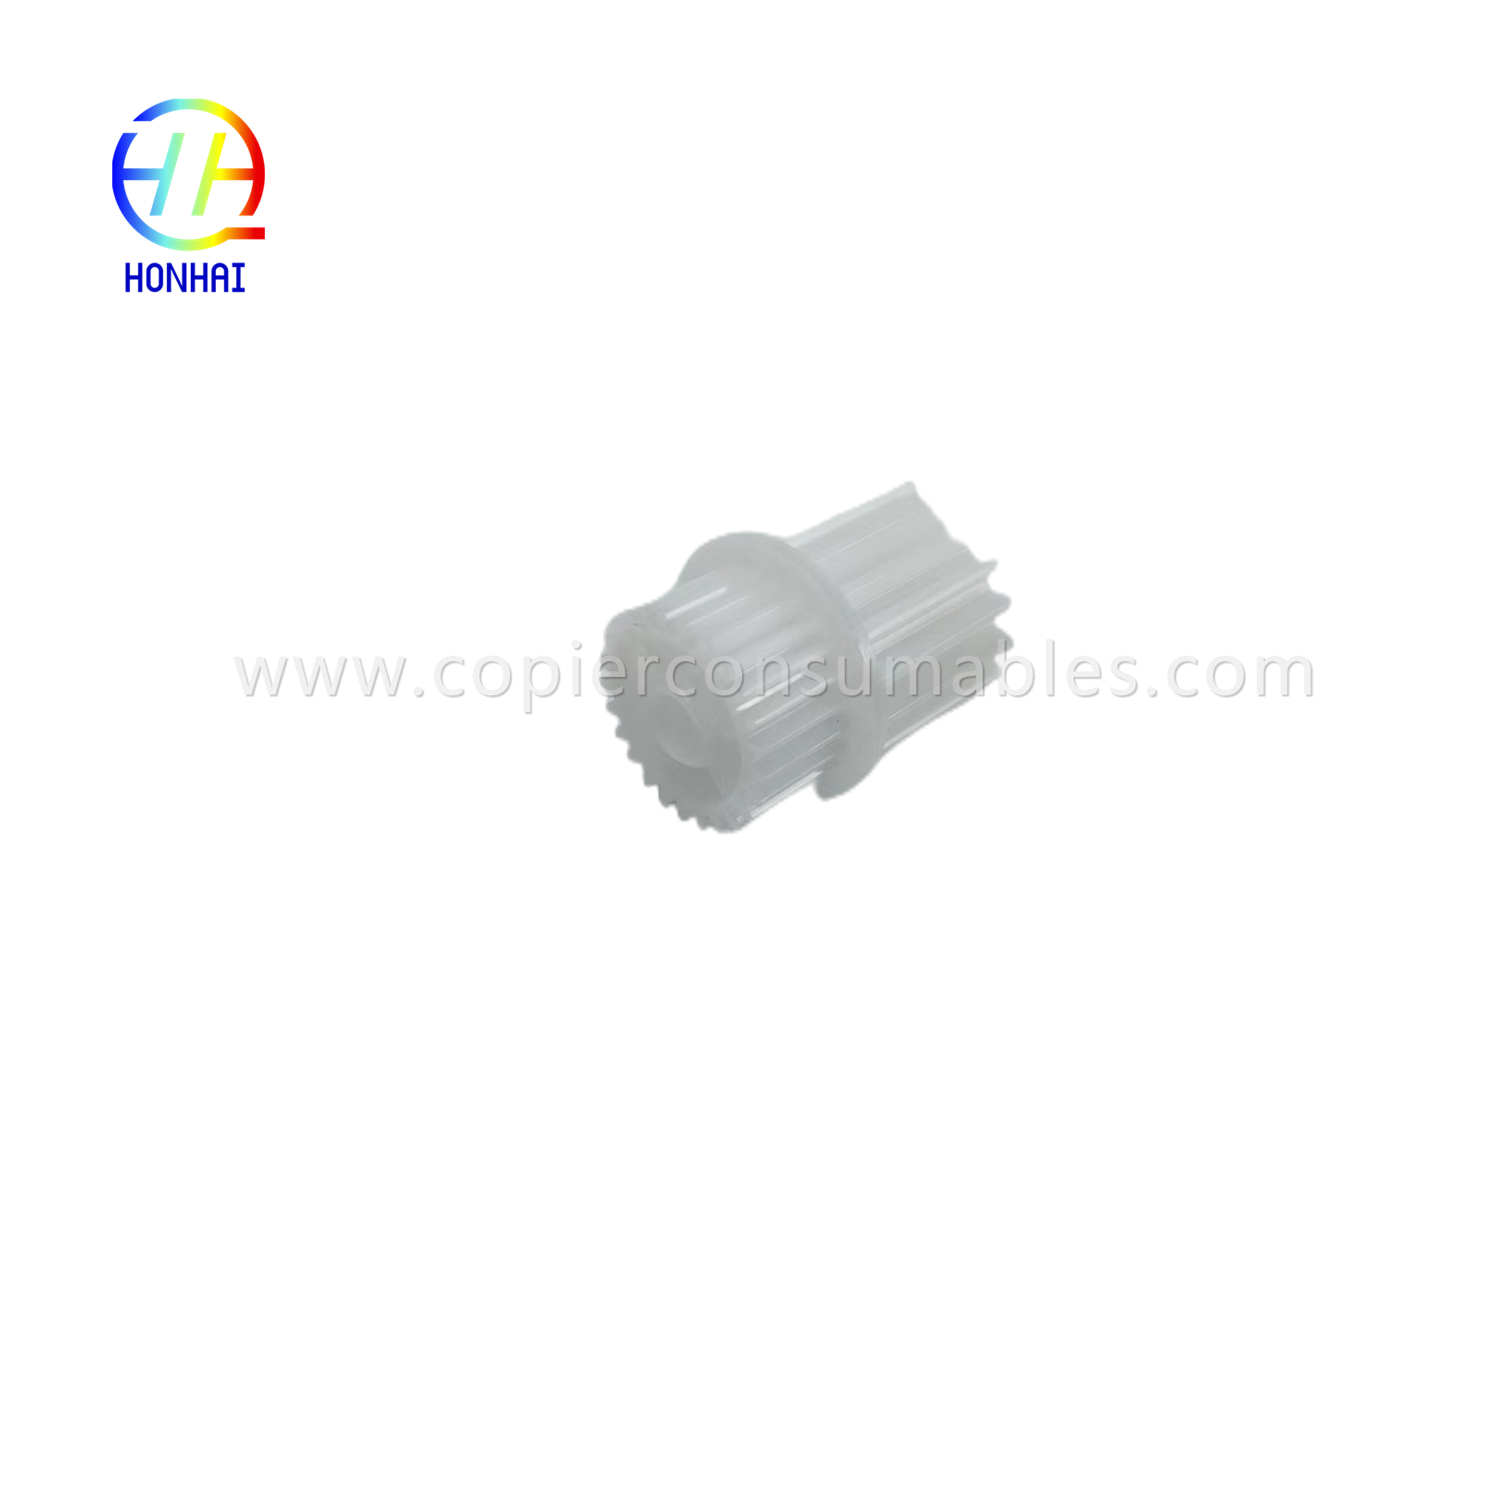 Lager for Canon iR2520 2525 253 18T25T FU8-0576 FU8-0576-000